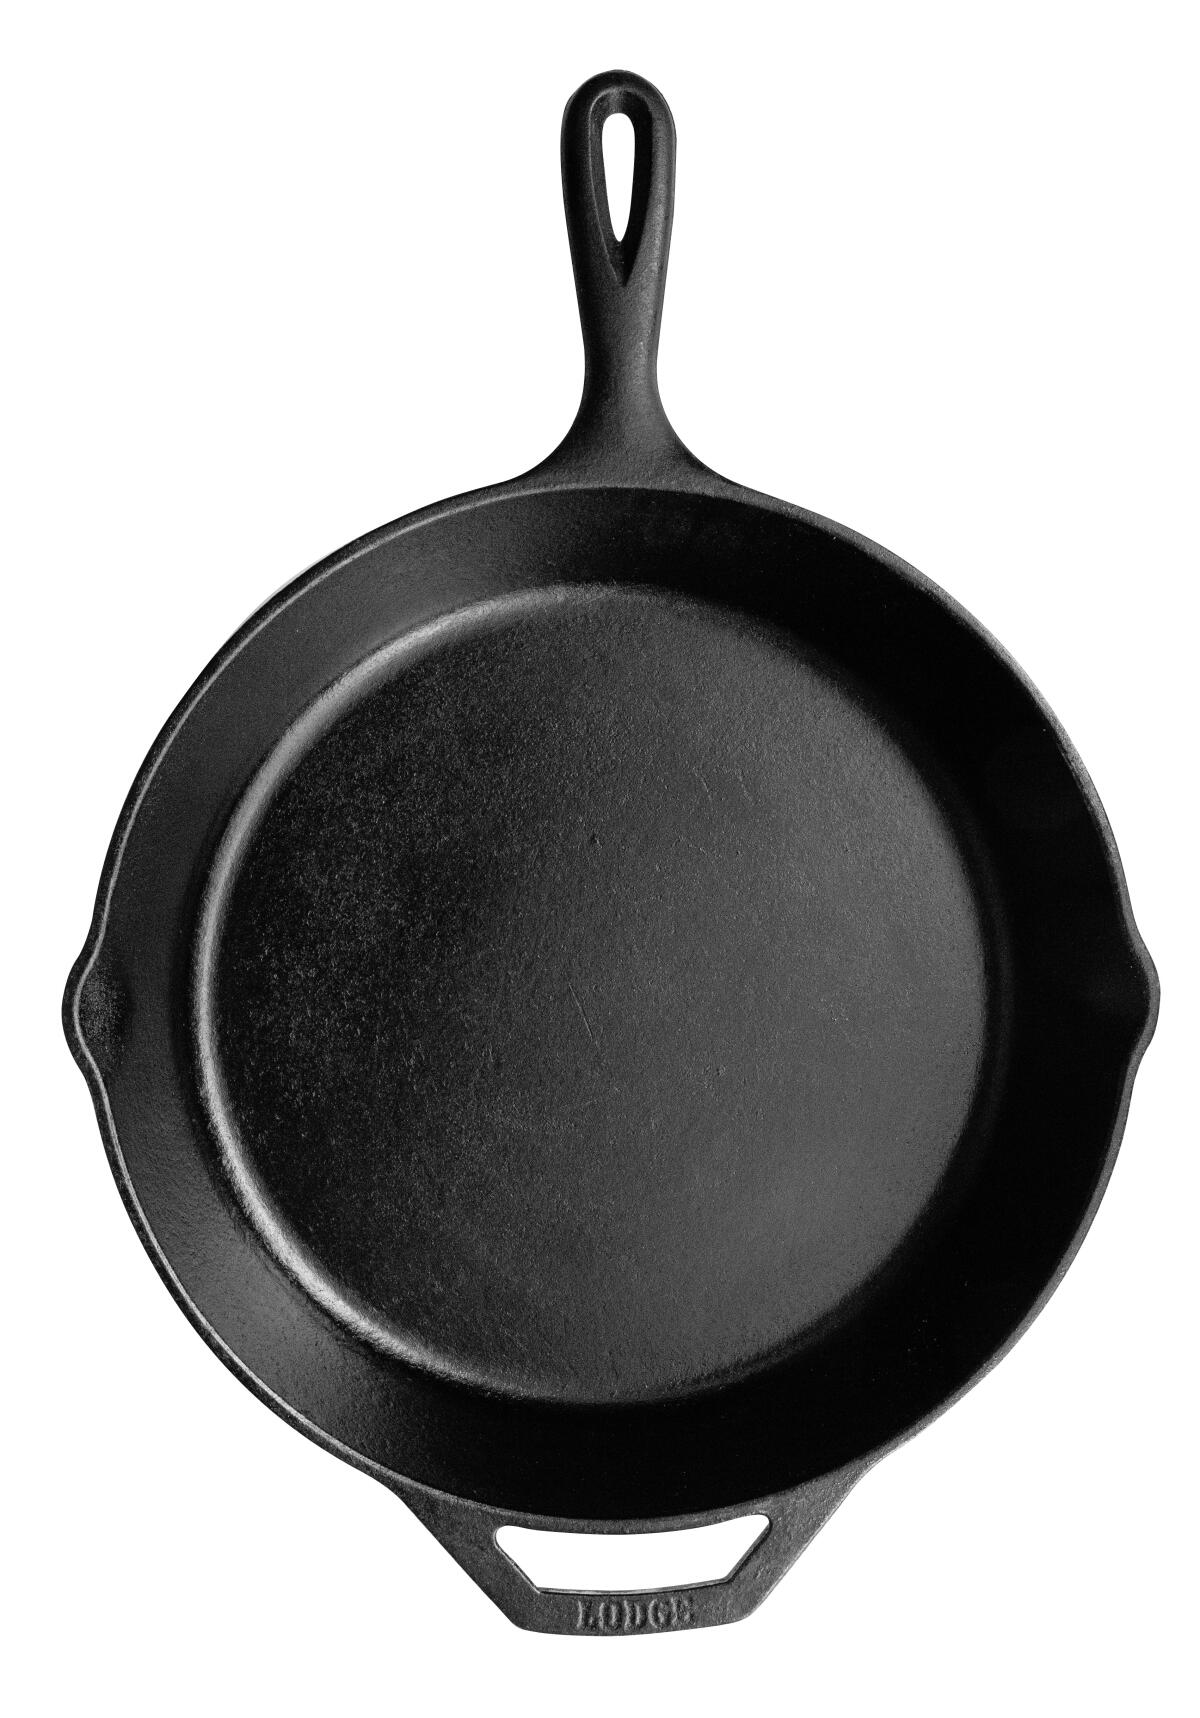 A good quality, well cared for cast-iron skillet can become a family heirloom.